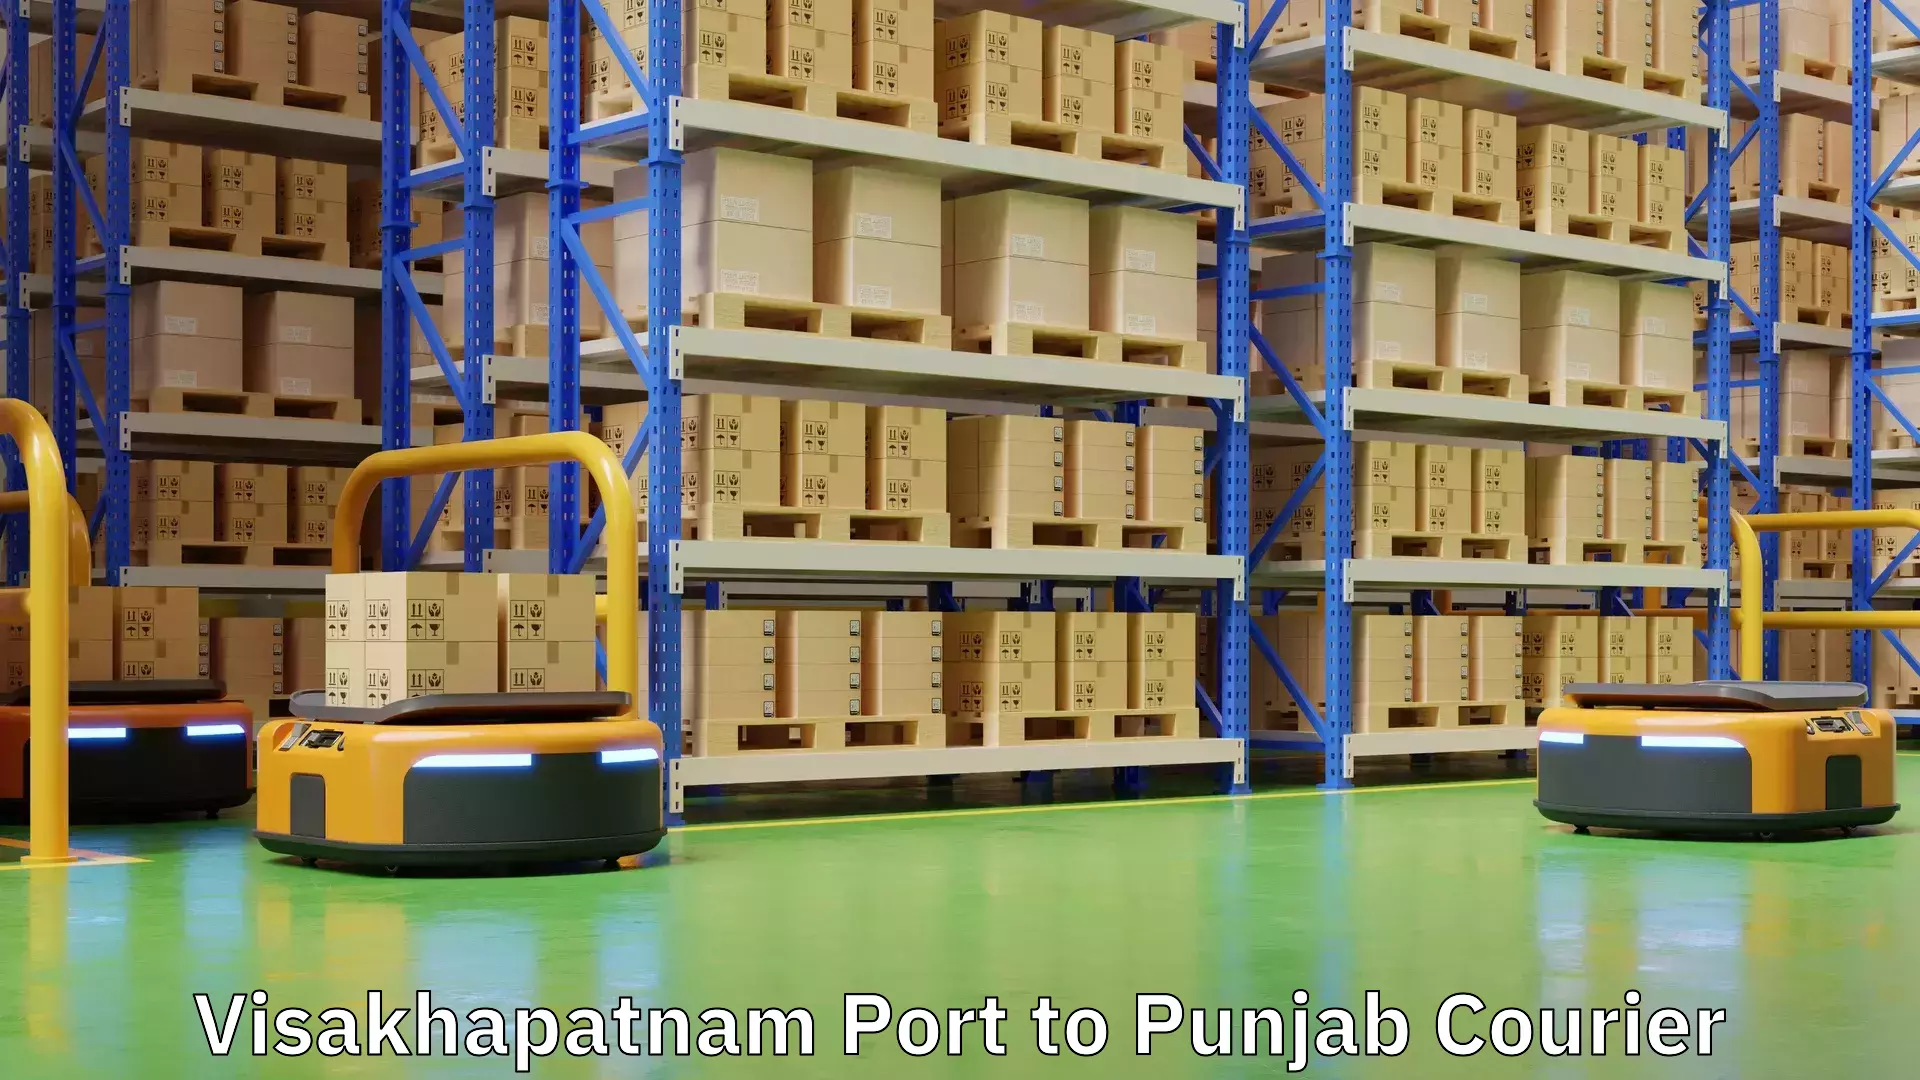 Large-scale shipping solutions Visakhapatnam Port to Punjab